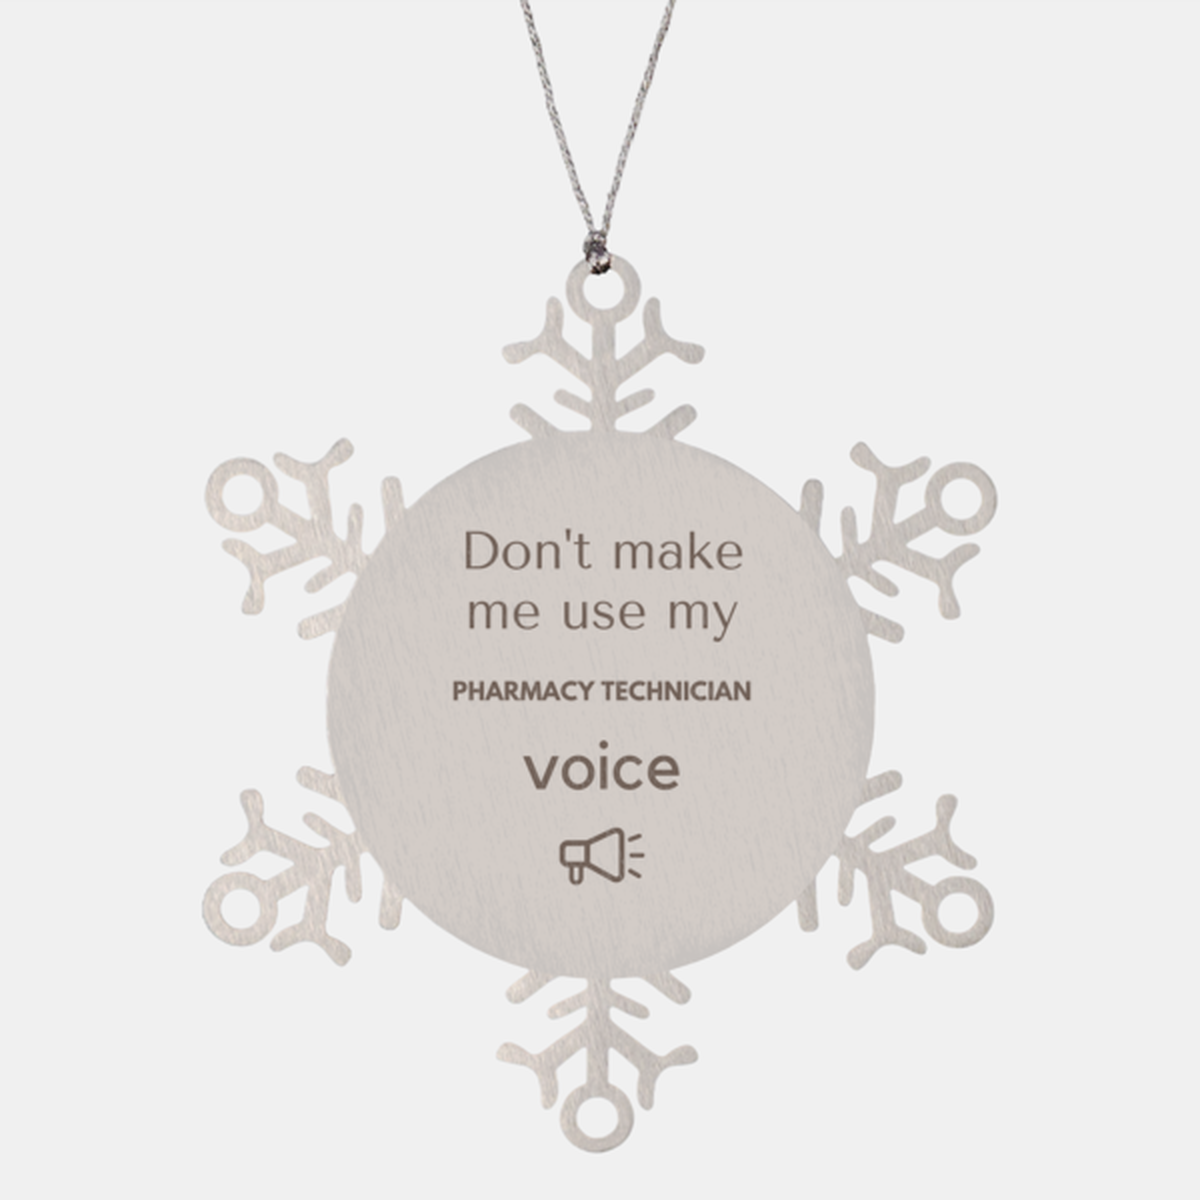 Don't make me use my Pharmacy Technician voice, Sarcasm Pharmacy Technician Ornament Gifts, Christmas Pharmacy Technician Snowflake Ornament Unique Gifts For Pharmacy Technician Coworkers, Men, Women, Colleague, Friends